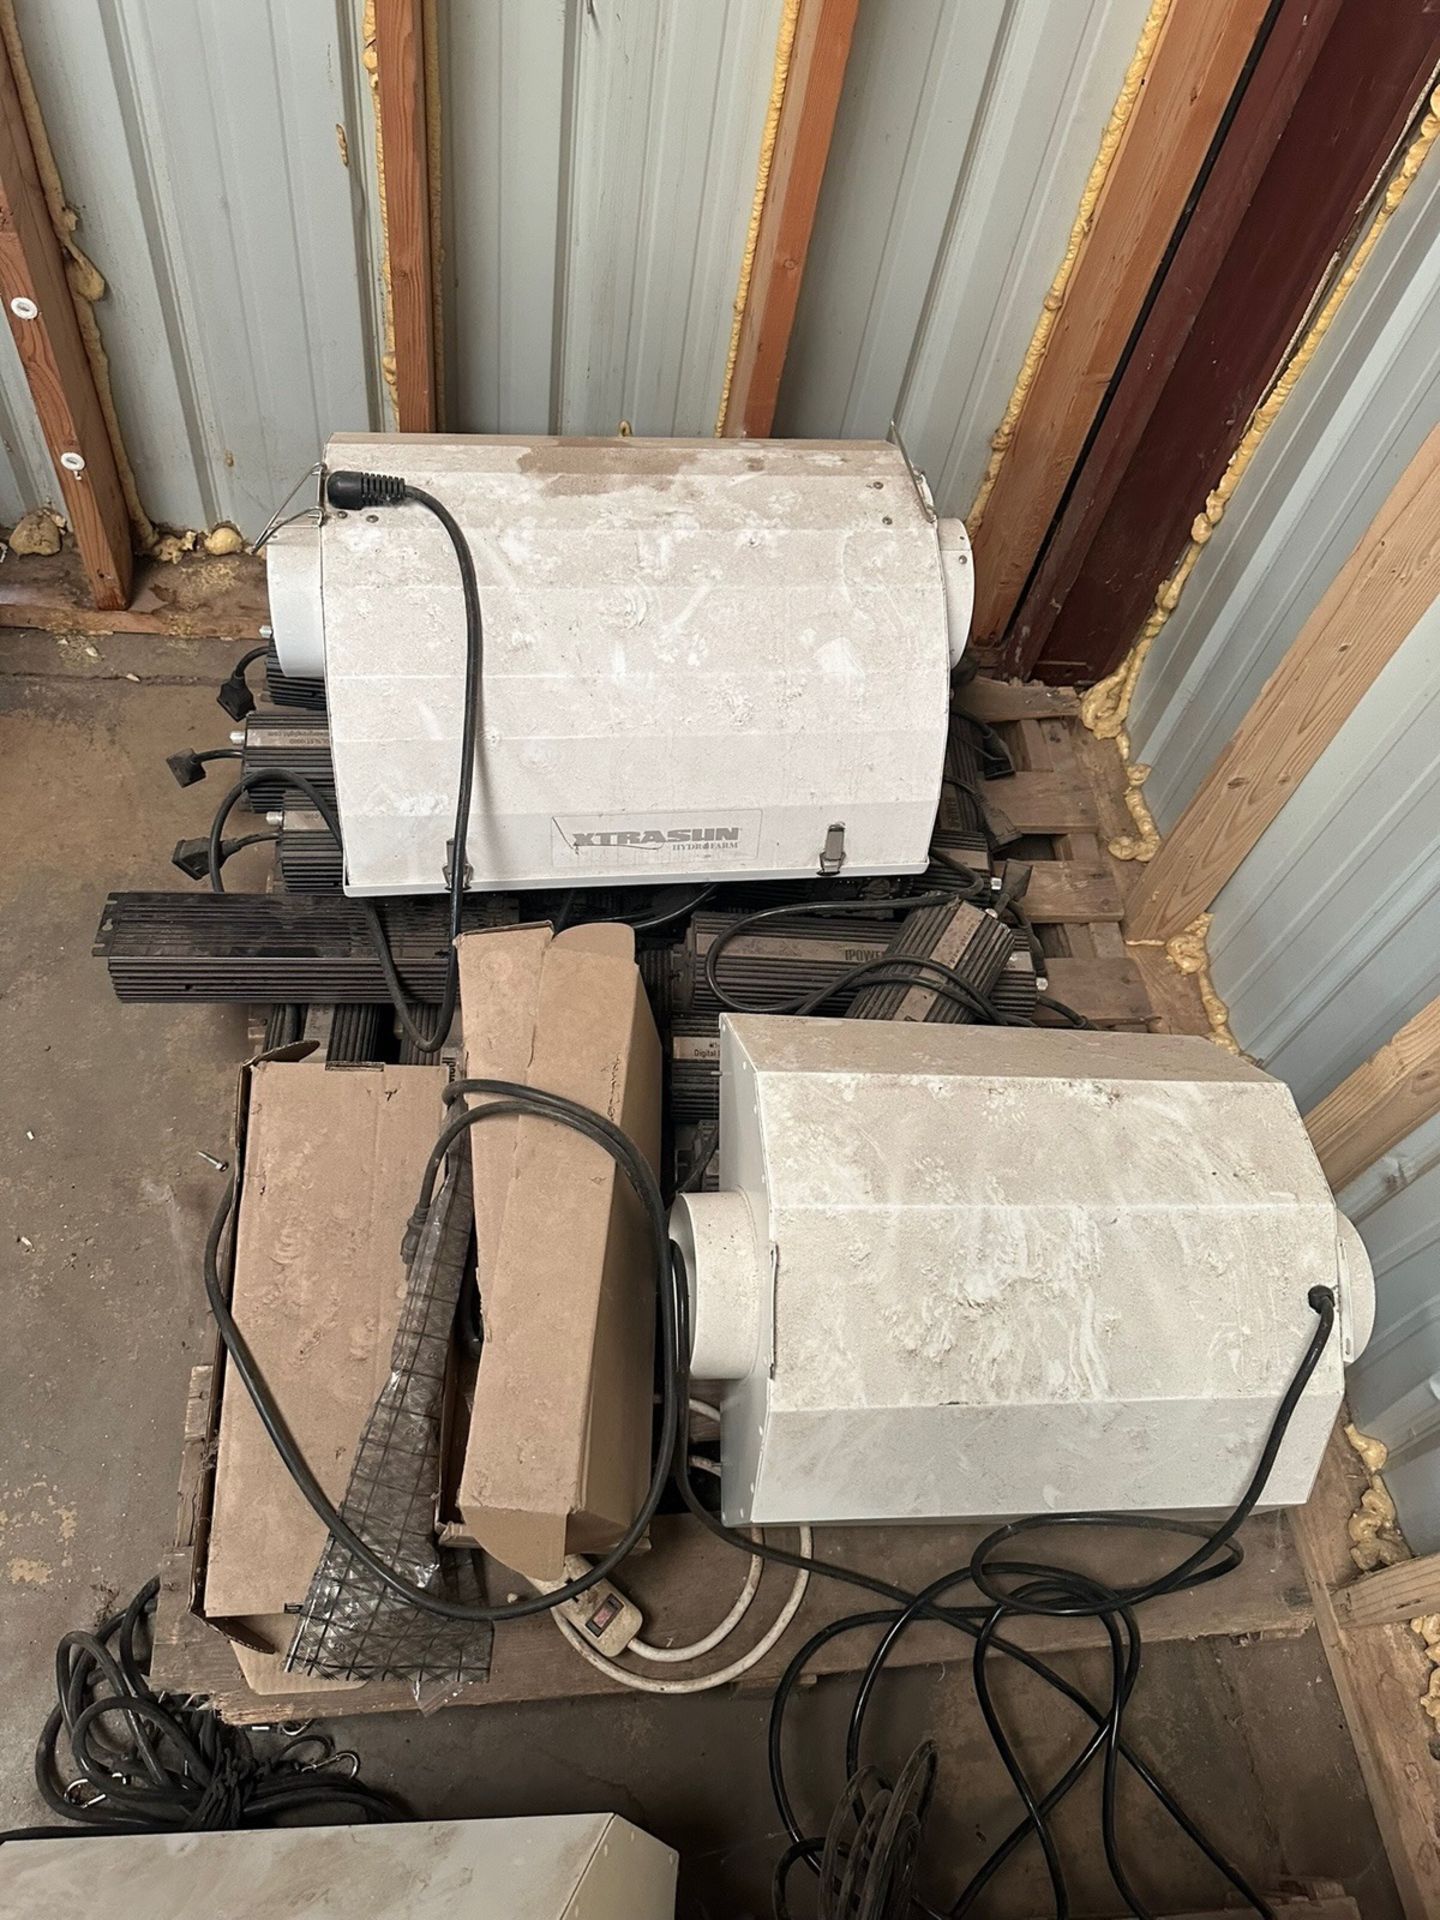 Pallets of Grow Lights And Power Supply | Rig Fee $35 - Image 5 of 5